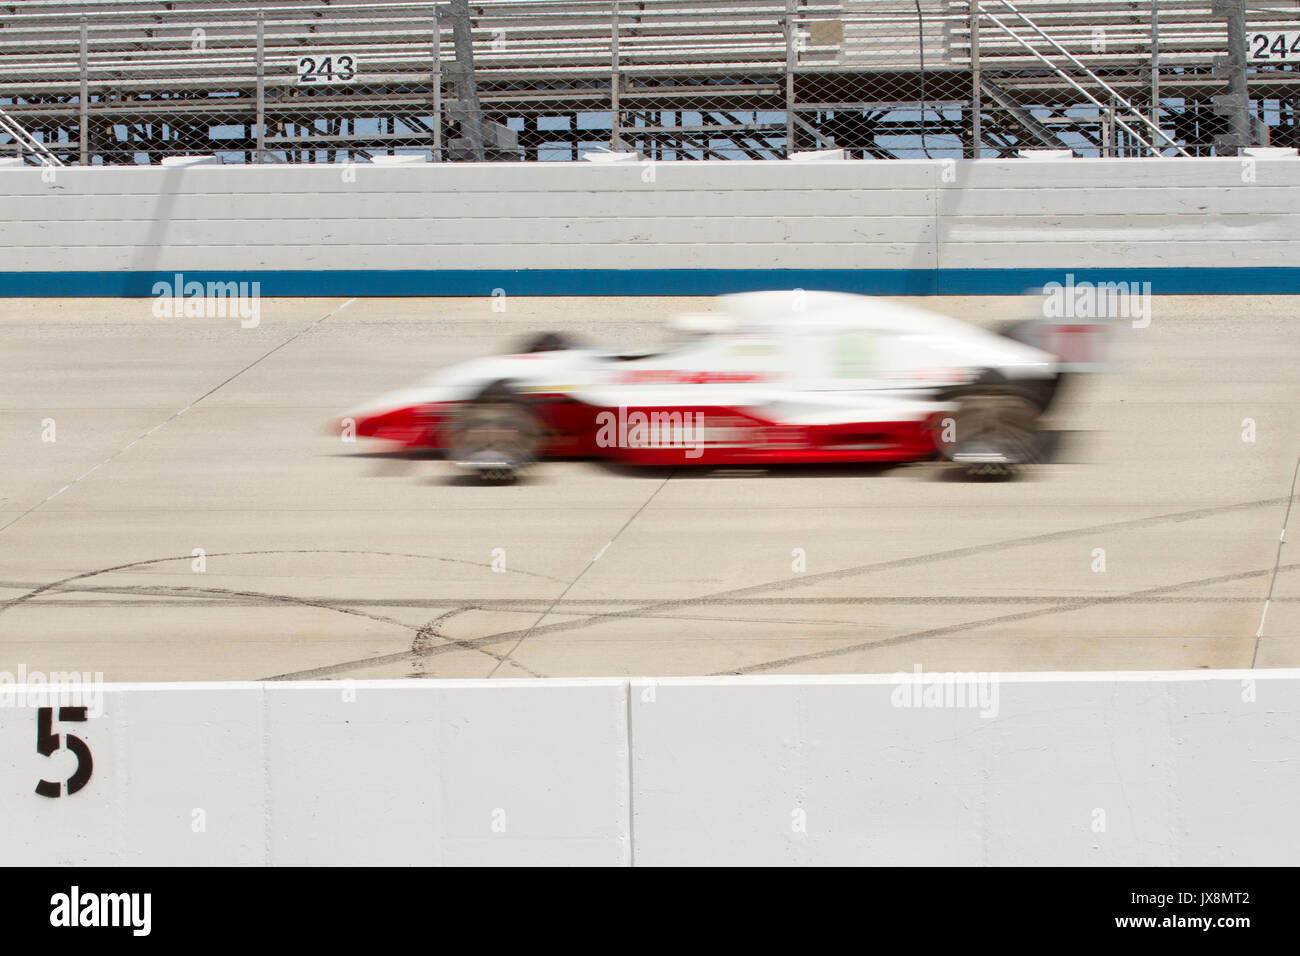 IRL race car blurred on track of motor speedway. Stock Photo